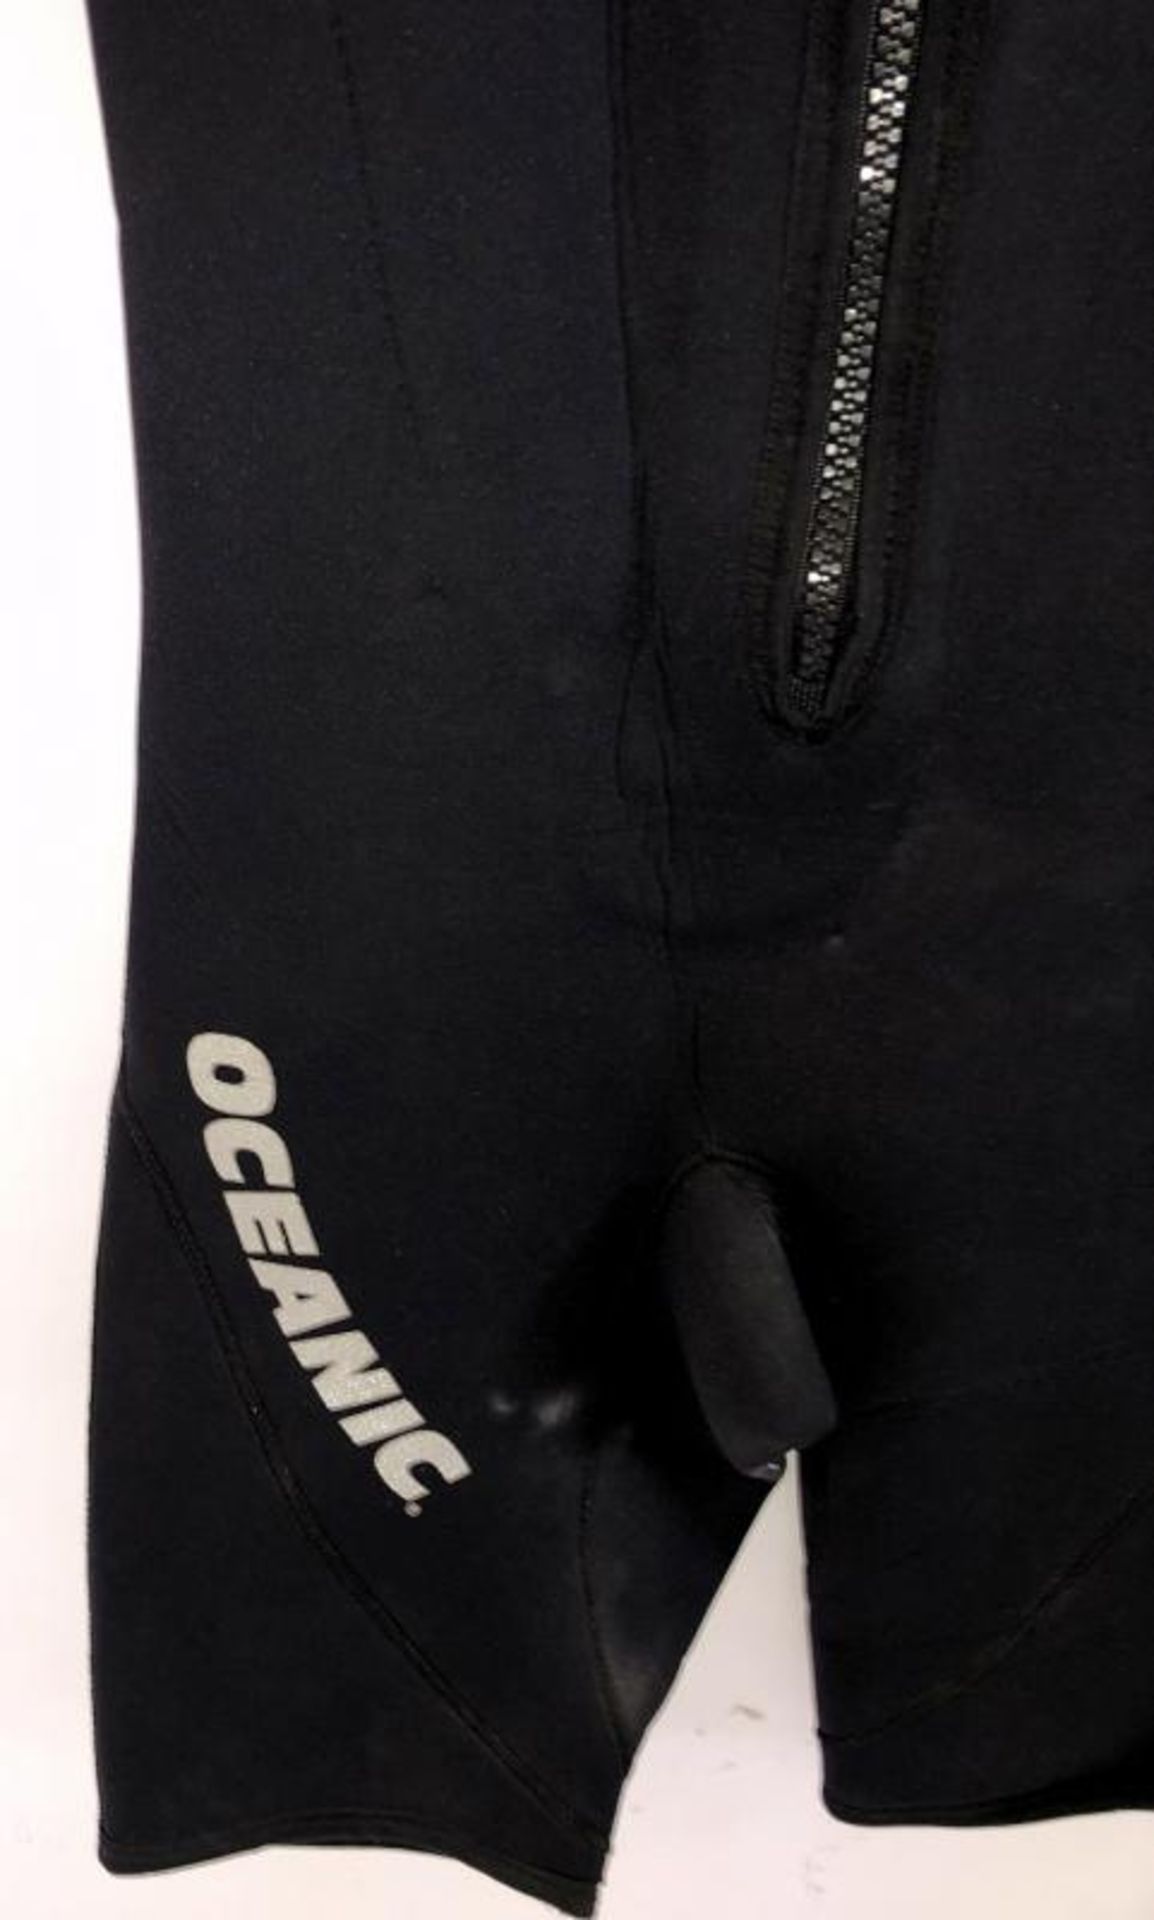 1 x Small Oceanic Shadow Titanium Shortie Wetsuit In Black - Ref: NS354 - CL349 - Location: Altrinch - Image 2 of 5